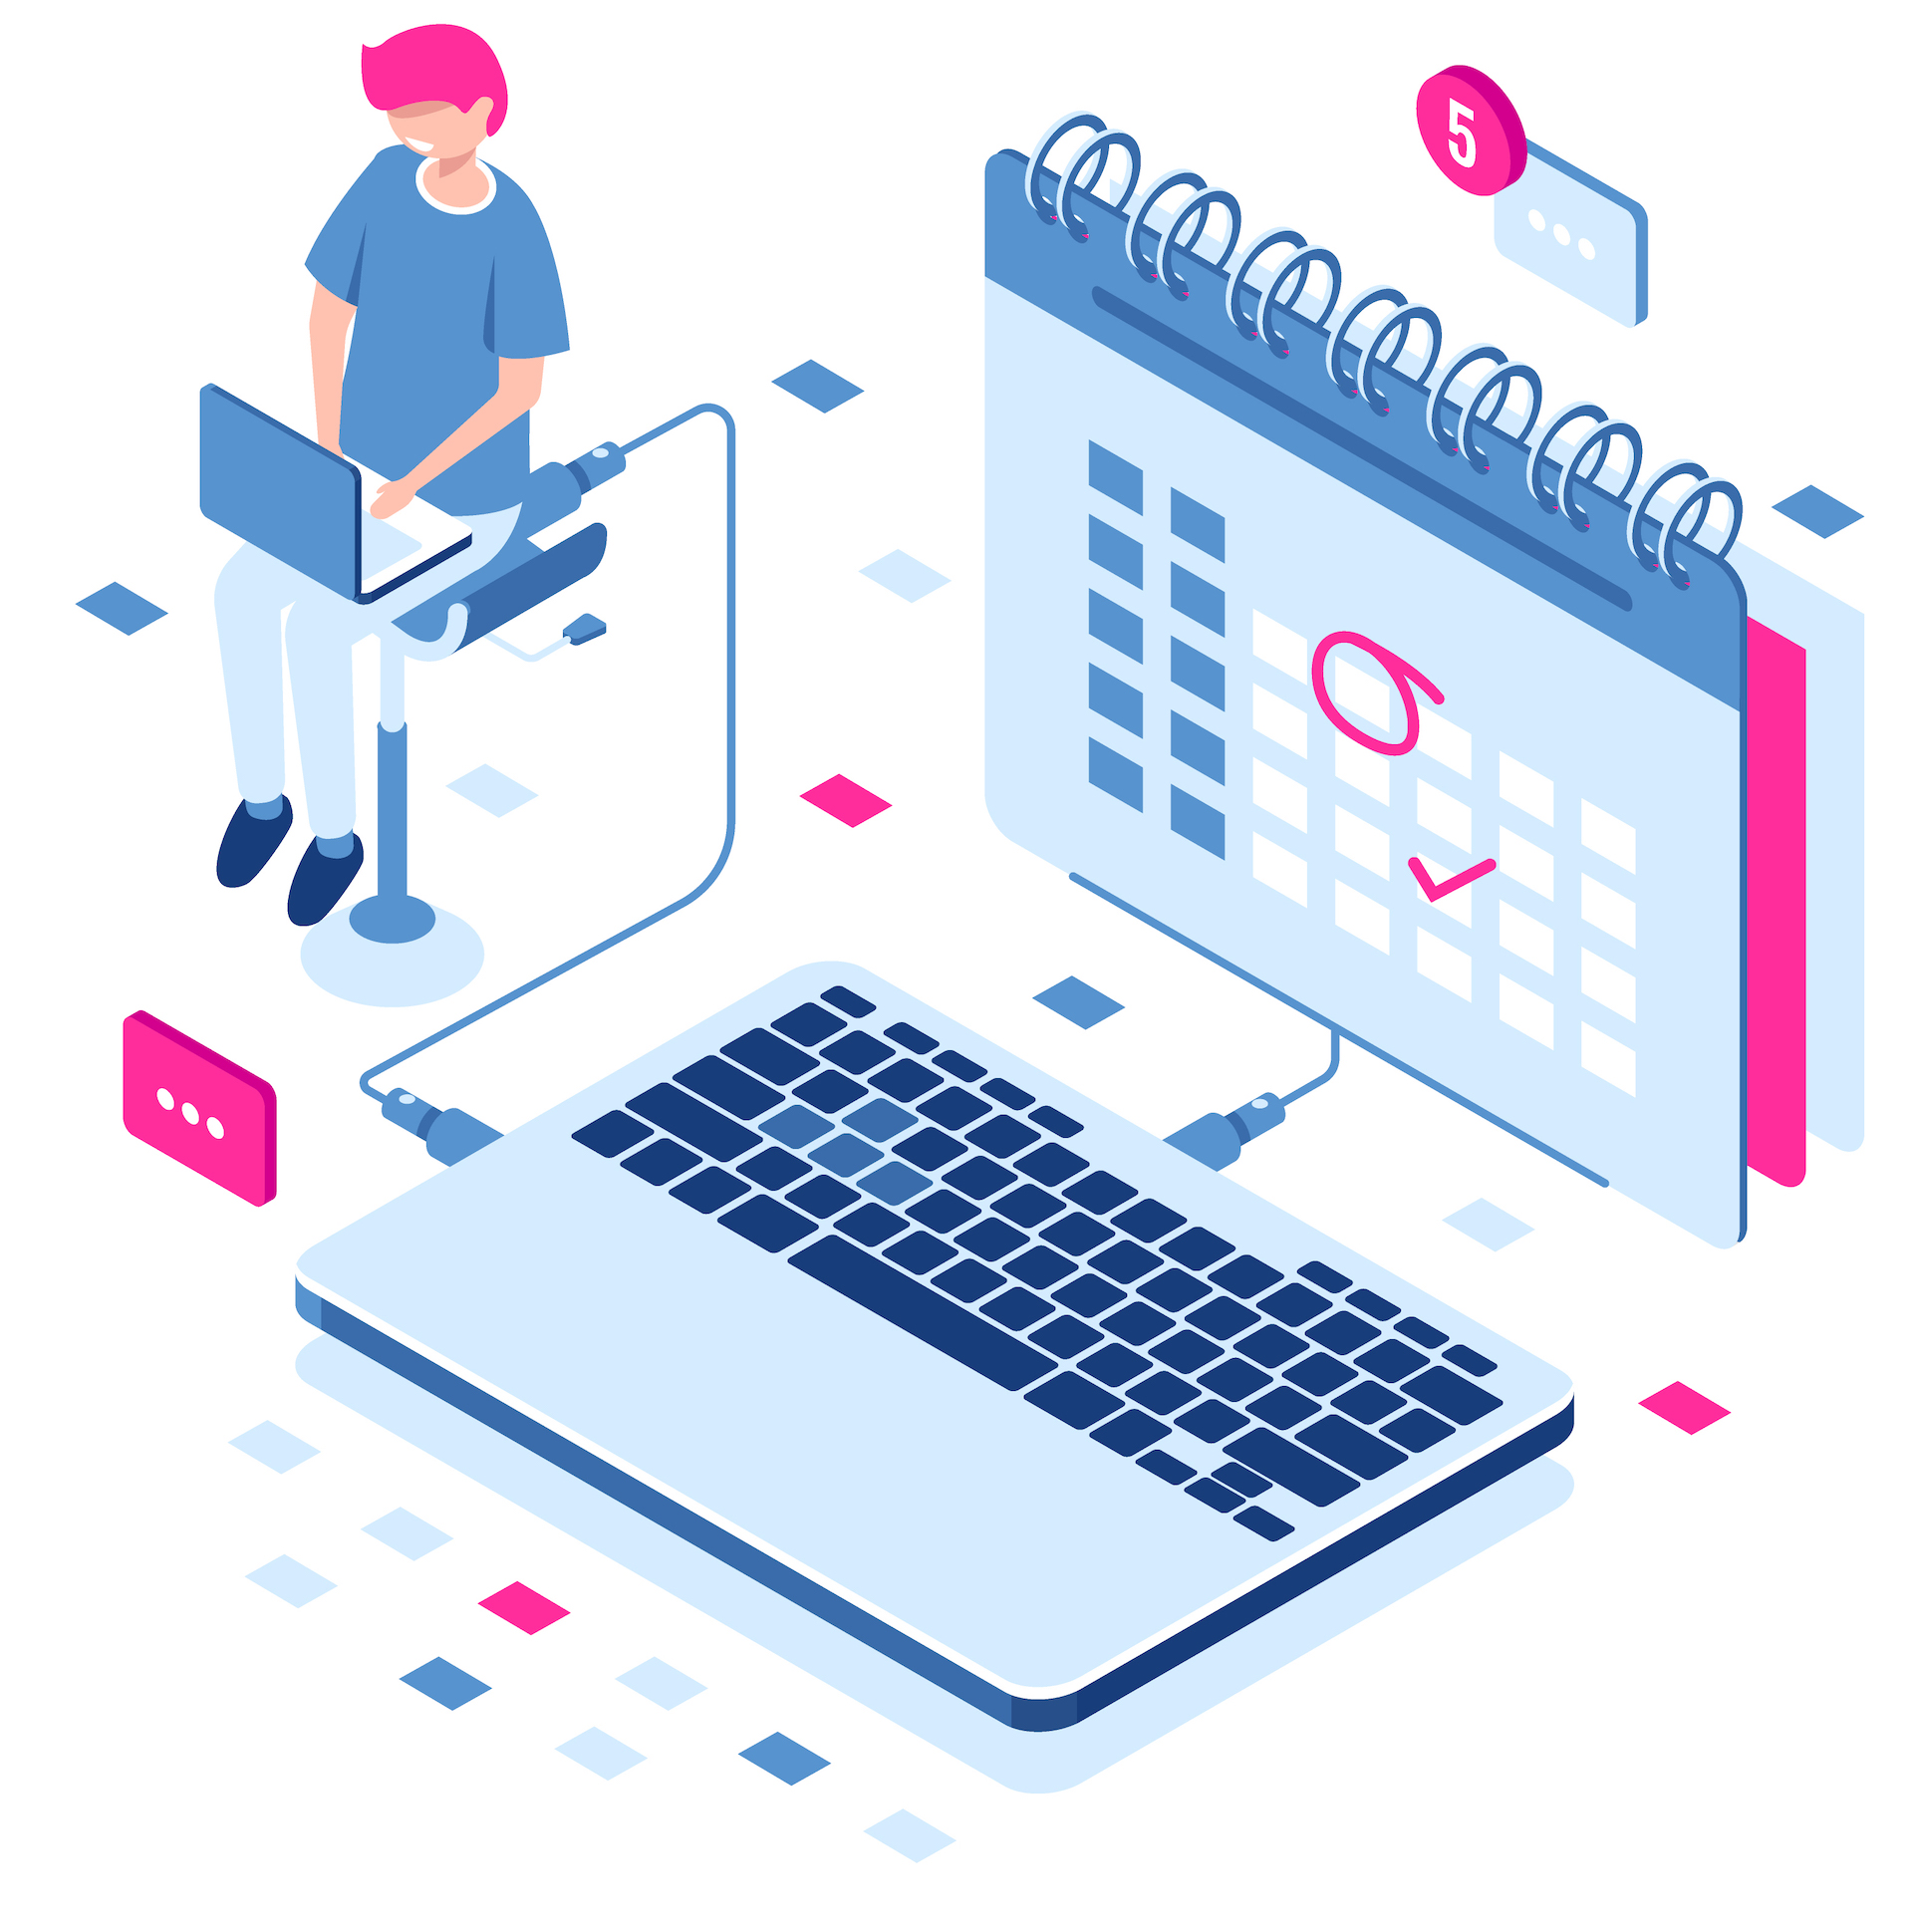 Concept of business manager, schedule in calendar, mark important Affair and event on the calendar, online task management and control business. Isometric falt vector illustration